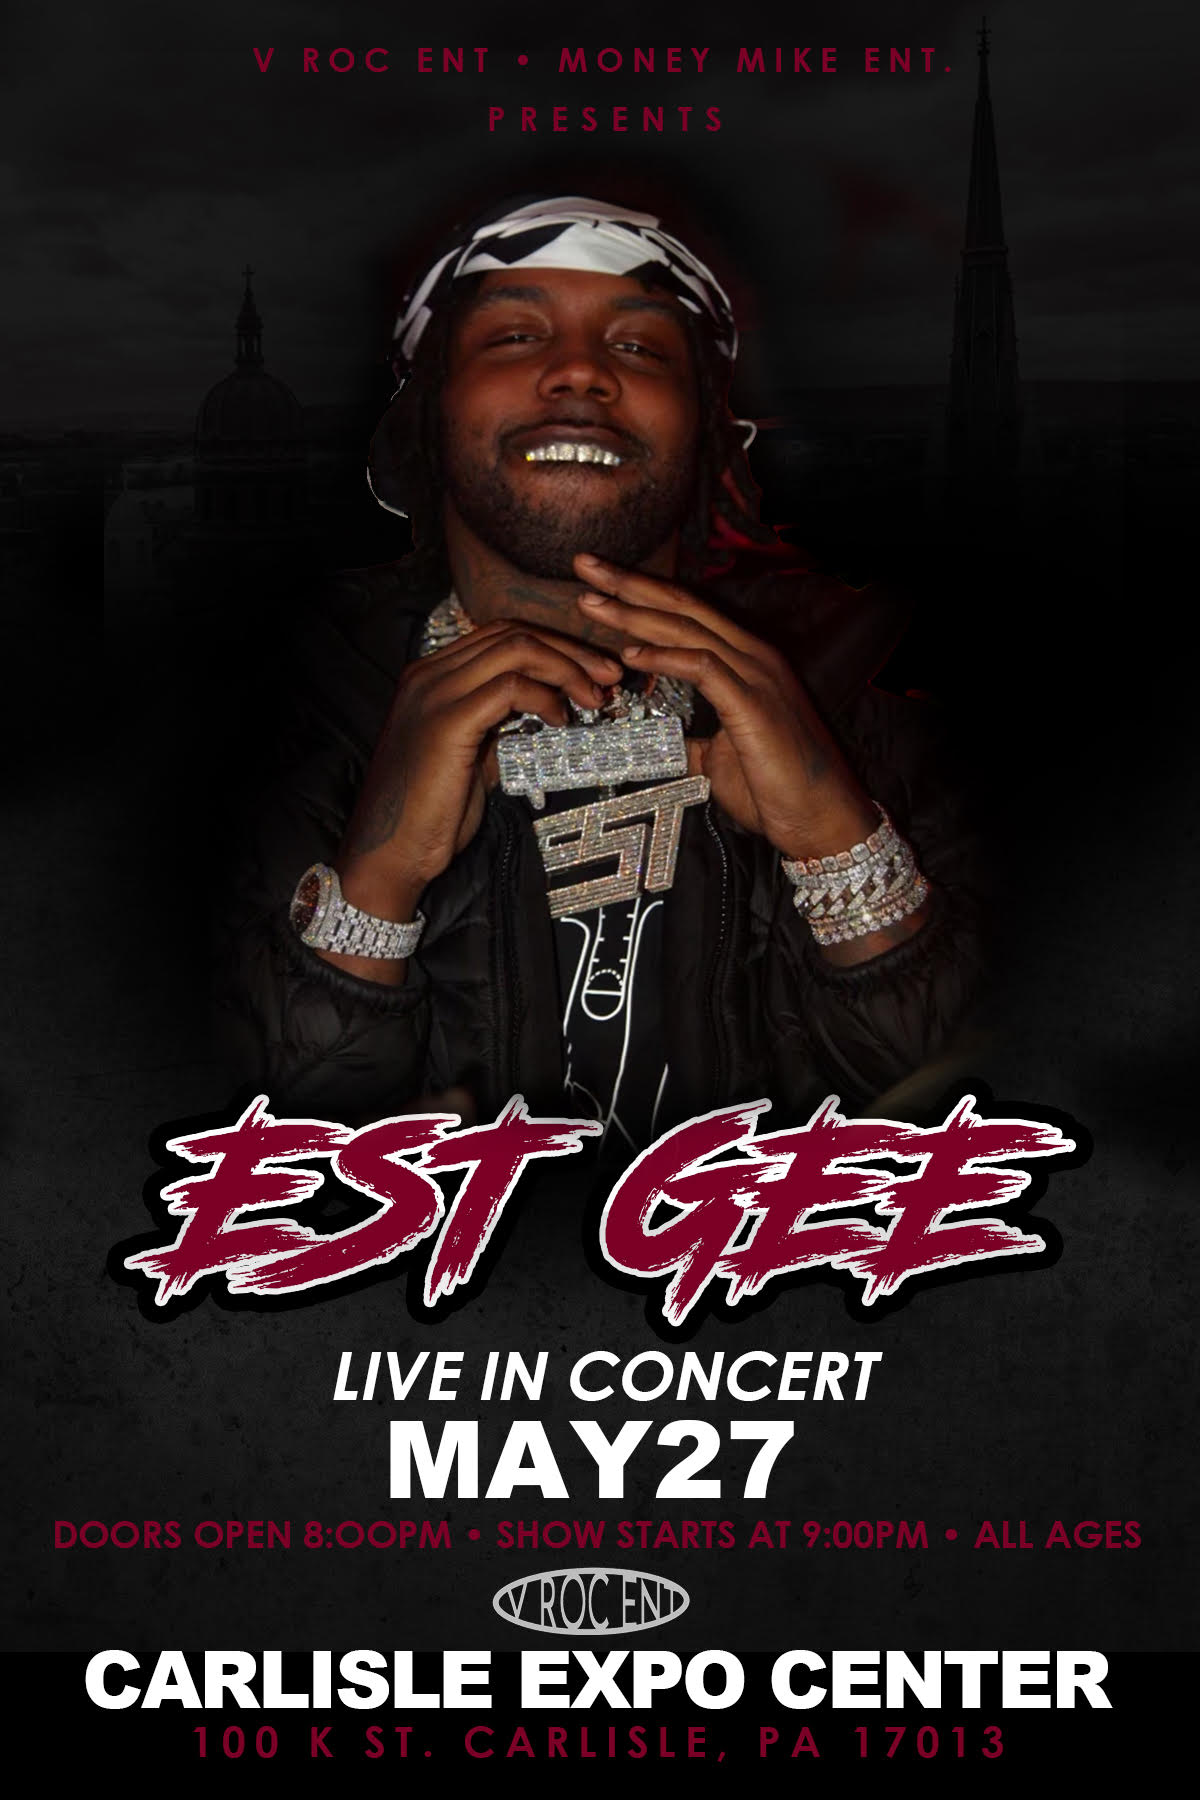 Buy Tickets to EST GEE in Carlisle on May 27, 2022